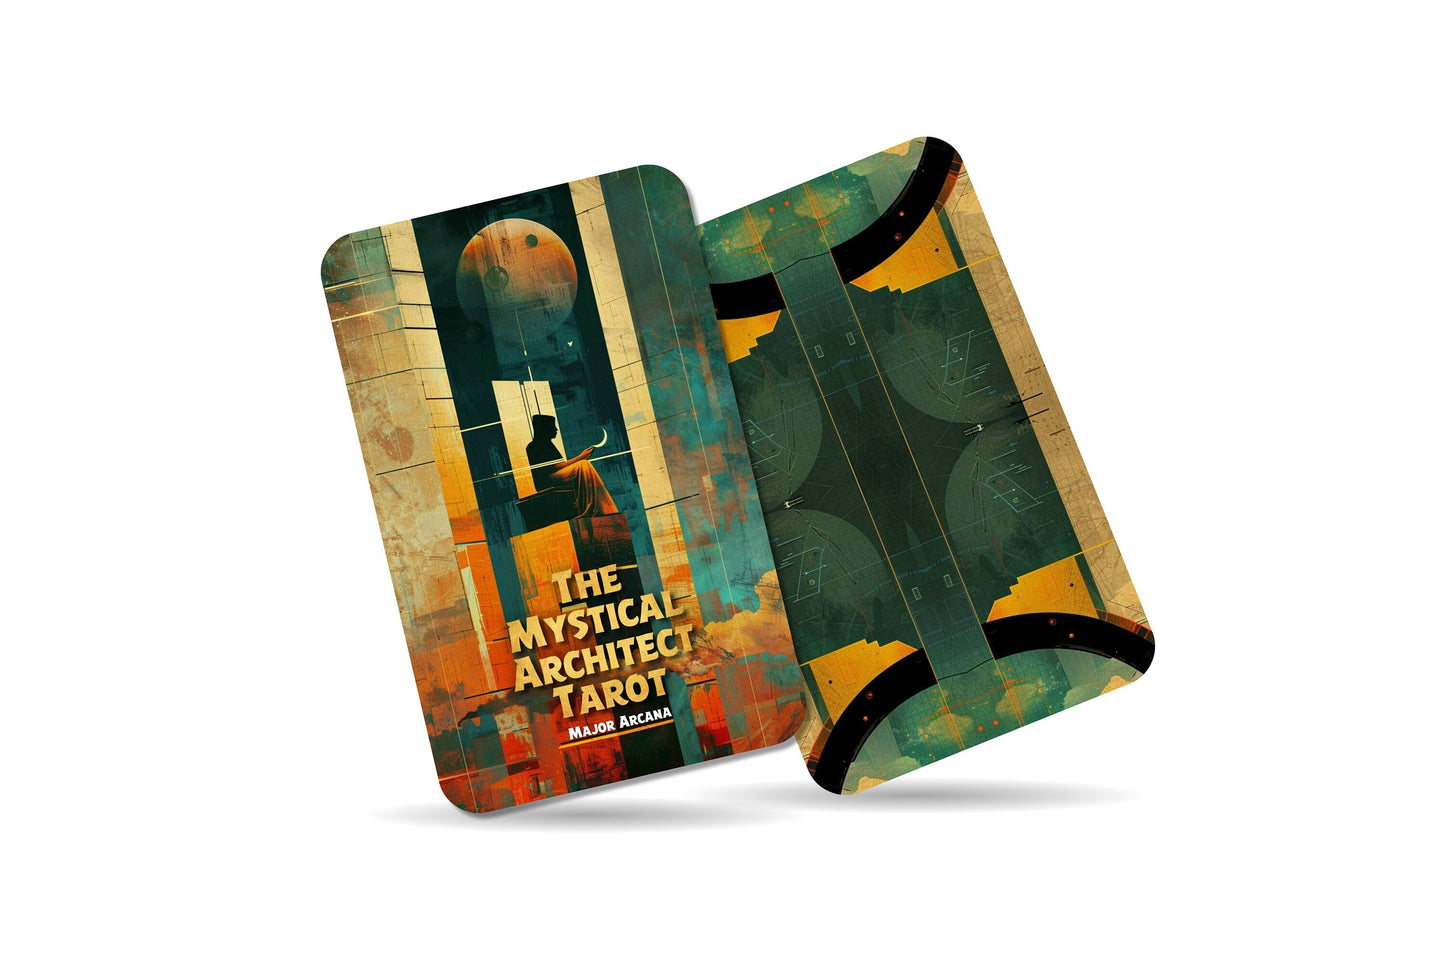 The Mystical Architect Tarot - 22 Major Arcana - Keywords for quick reading - For daily reflection - Divination tool